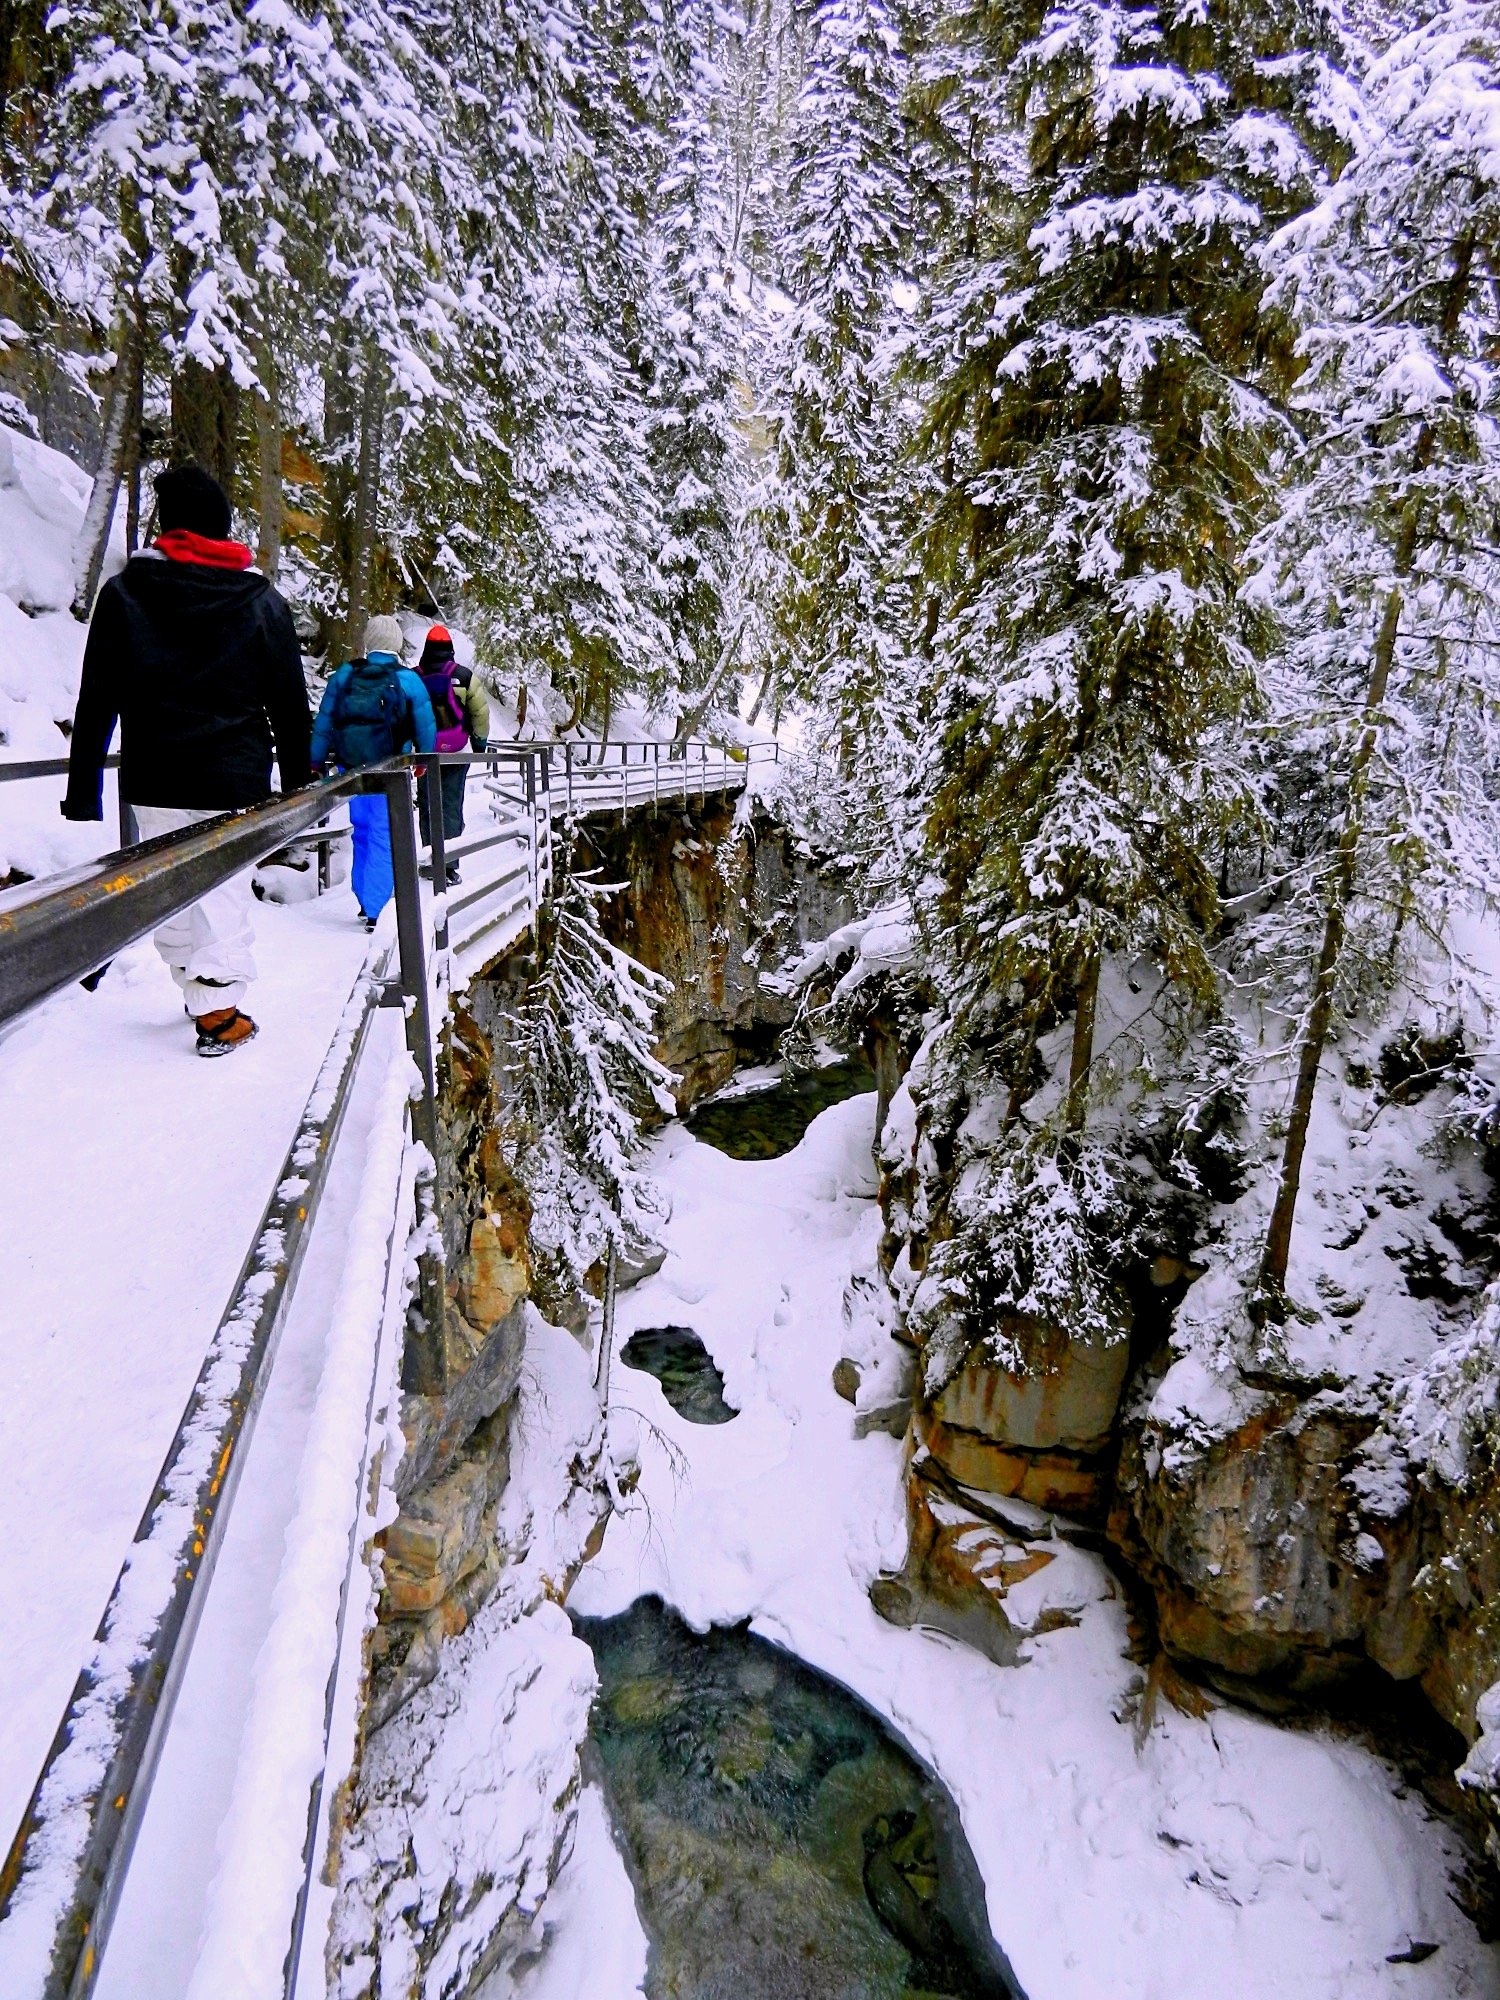 Hikes along the Lower Canyon in Banff National Park.jpg